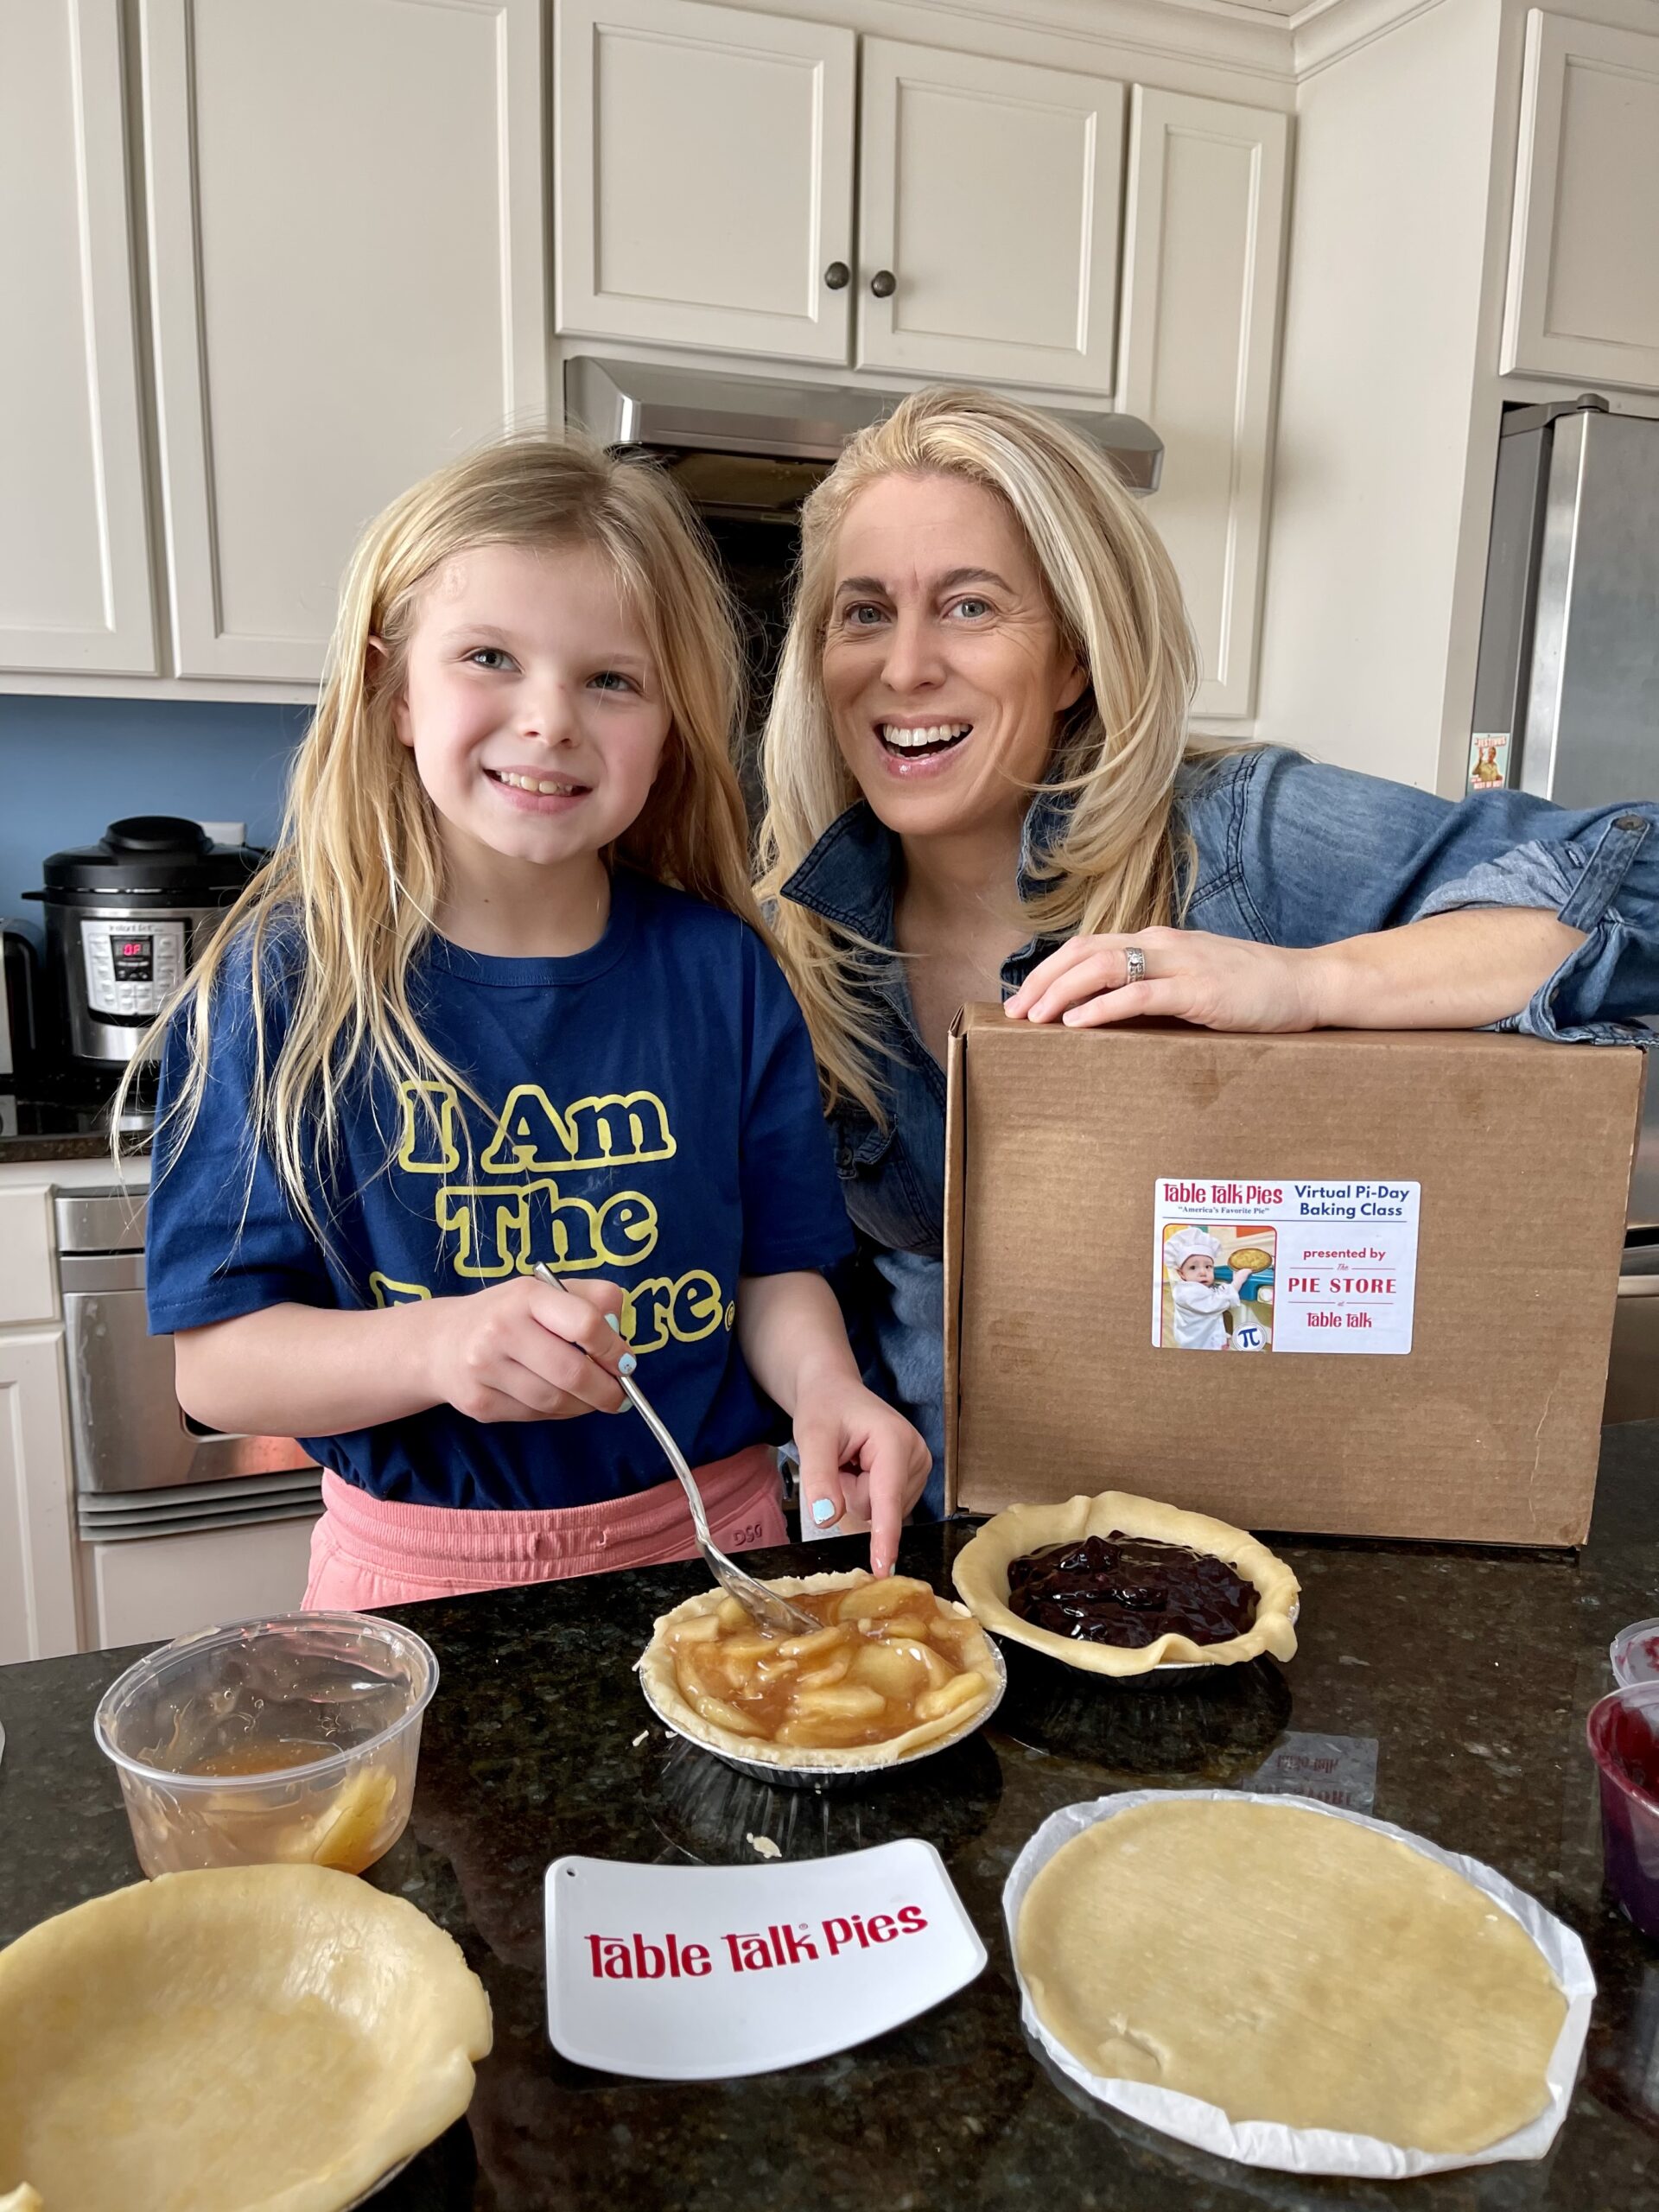 Mini Pie Making Kit from Table Talk Pies - Stylish Life for Moms